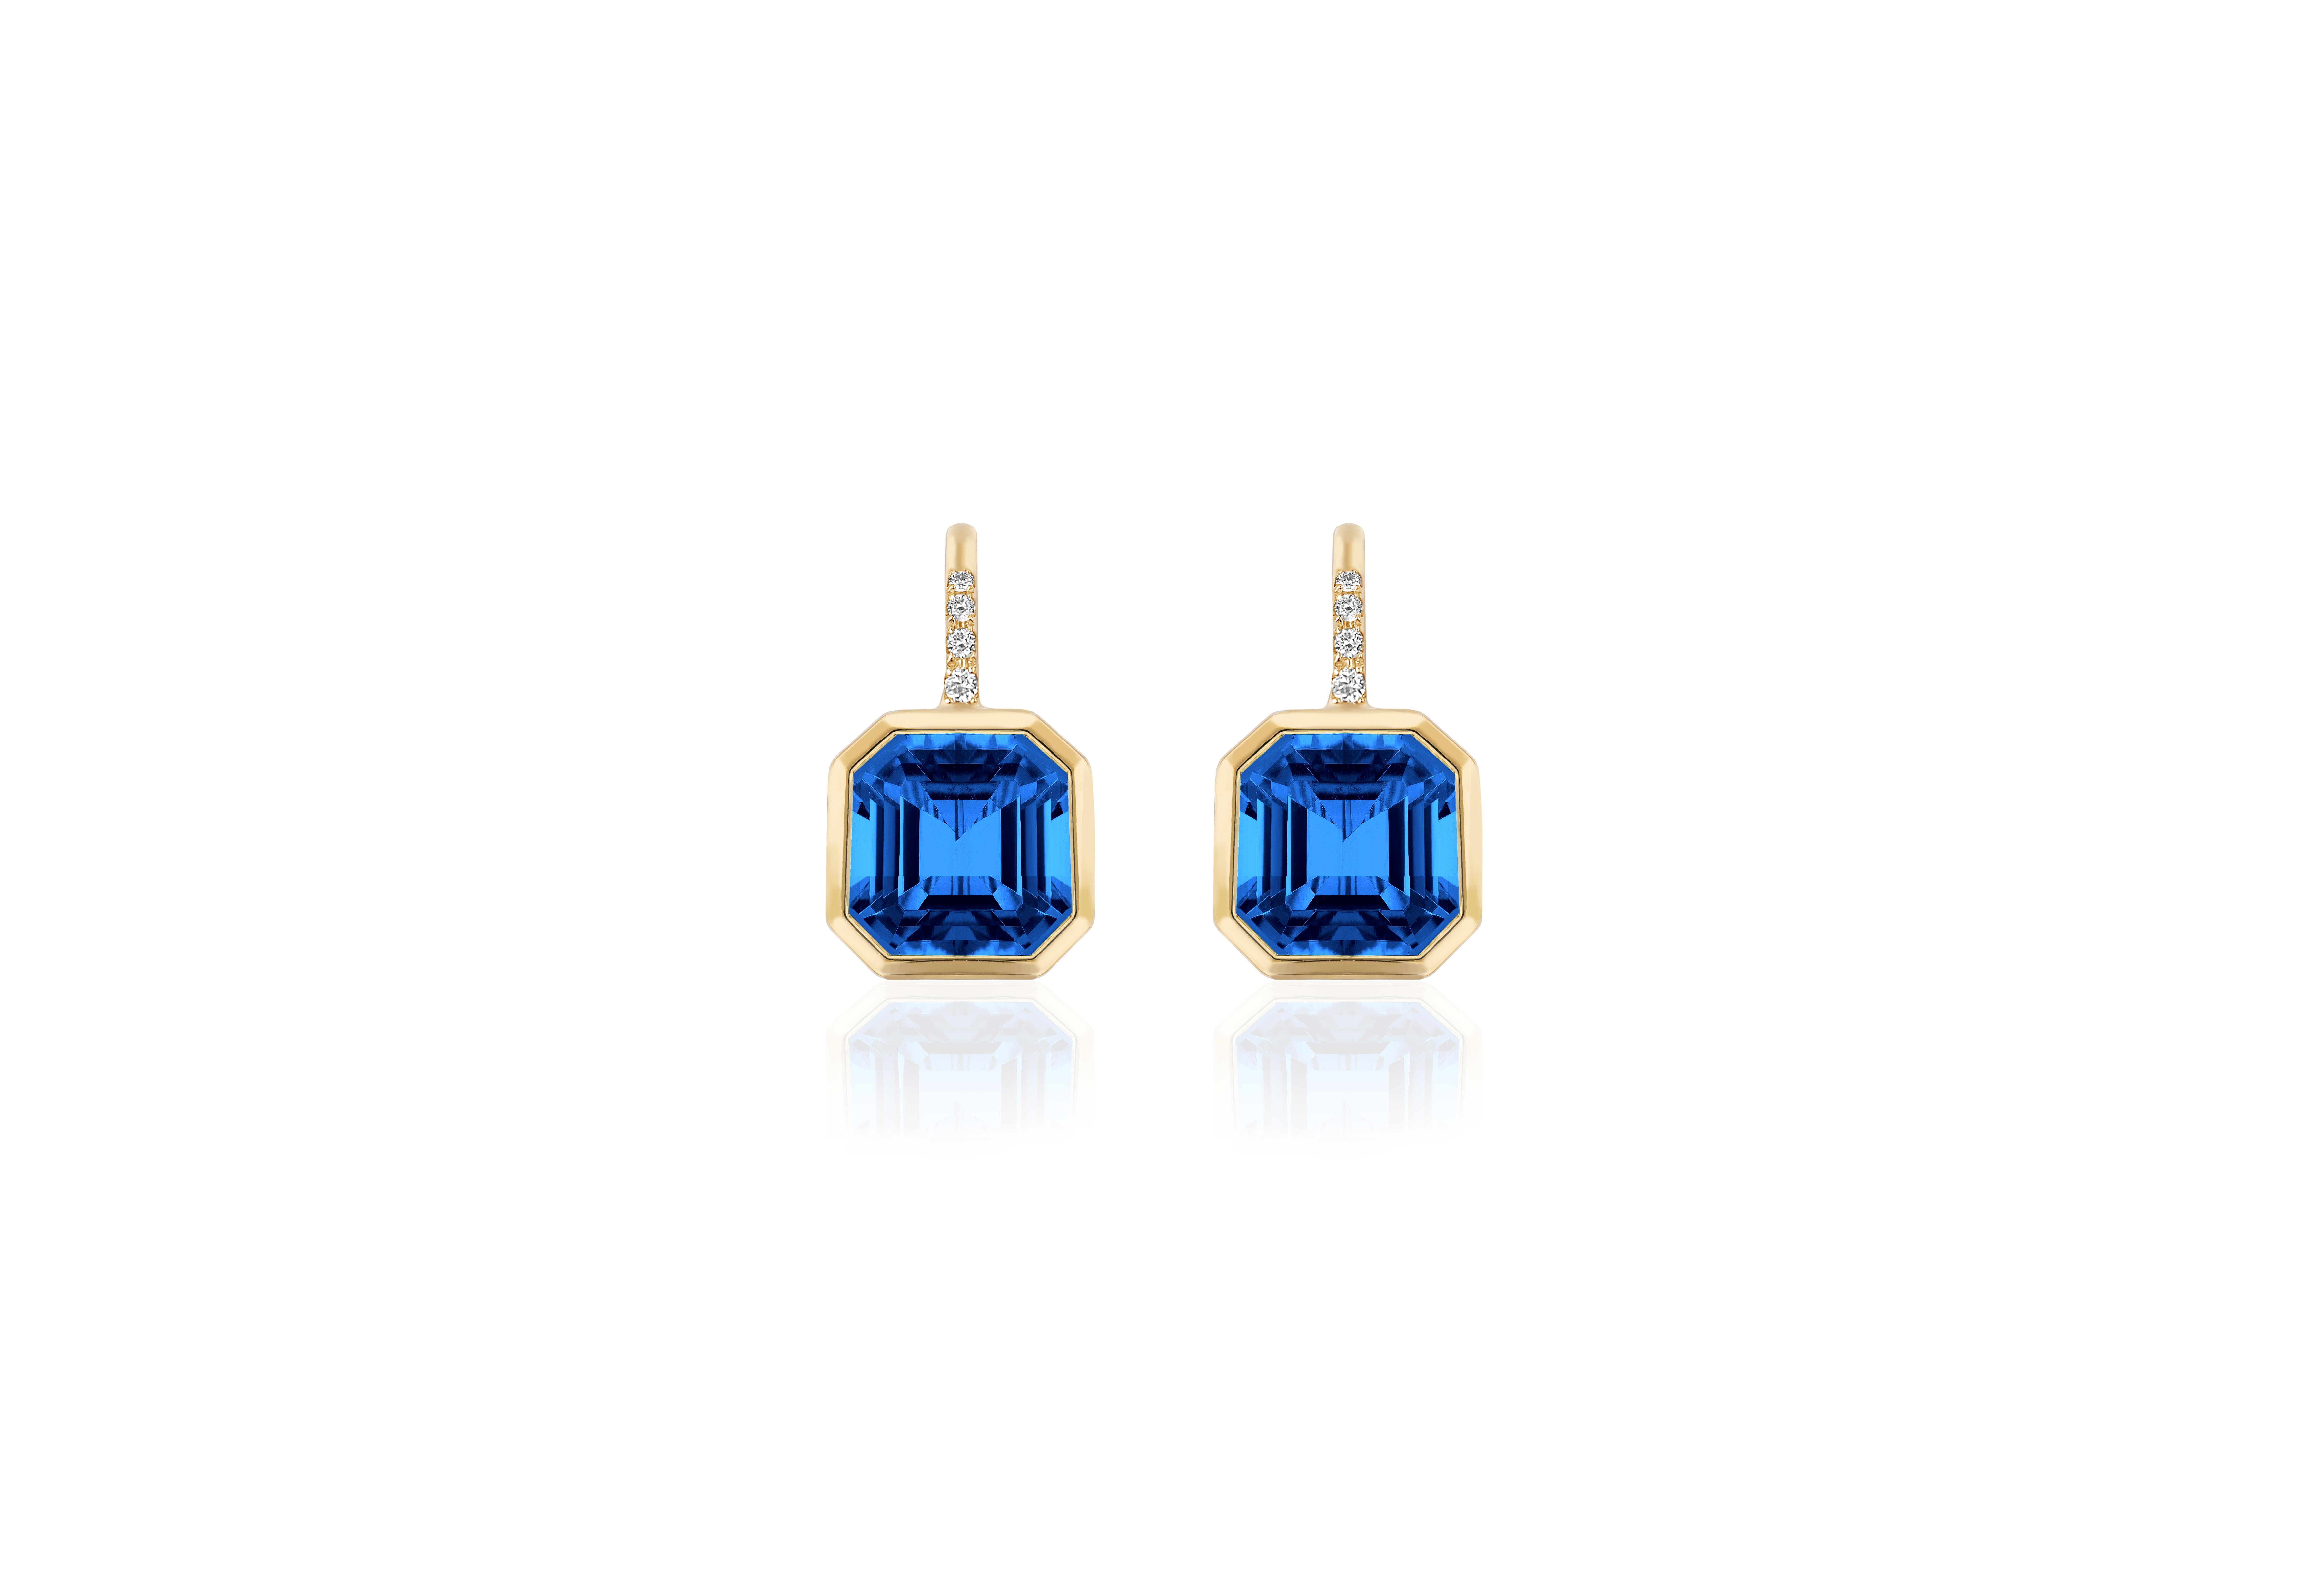 Asscher Cut London Blue Topaz Earrings on Wire with Diamonds in 18K Yellow Gold, from 'Gossip' Collection. Like any good piece of gossip, this collection carries a hint of shock value. These earrings are perfect for an everyday look and can be